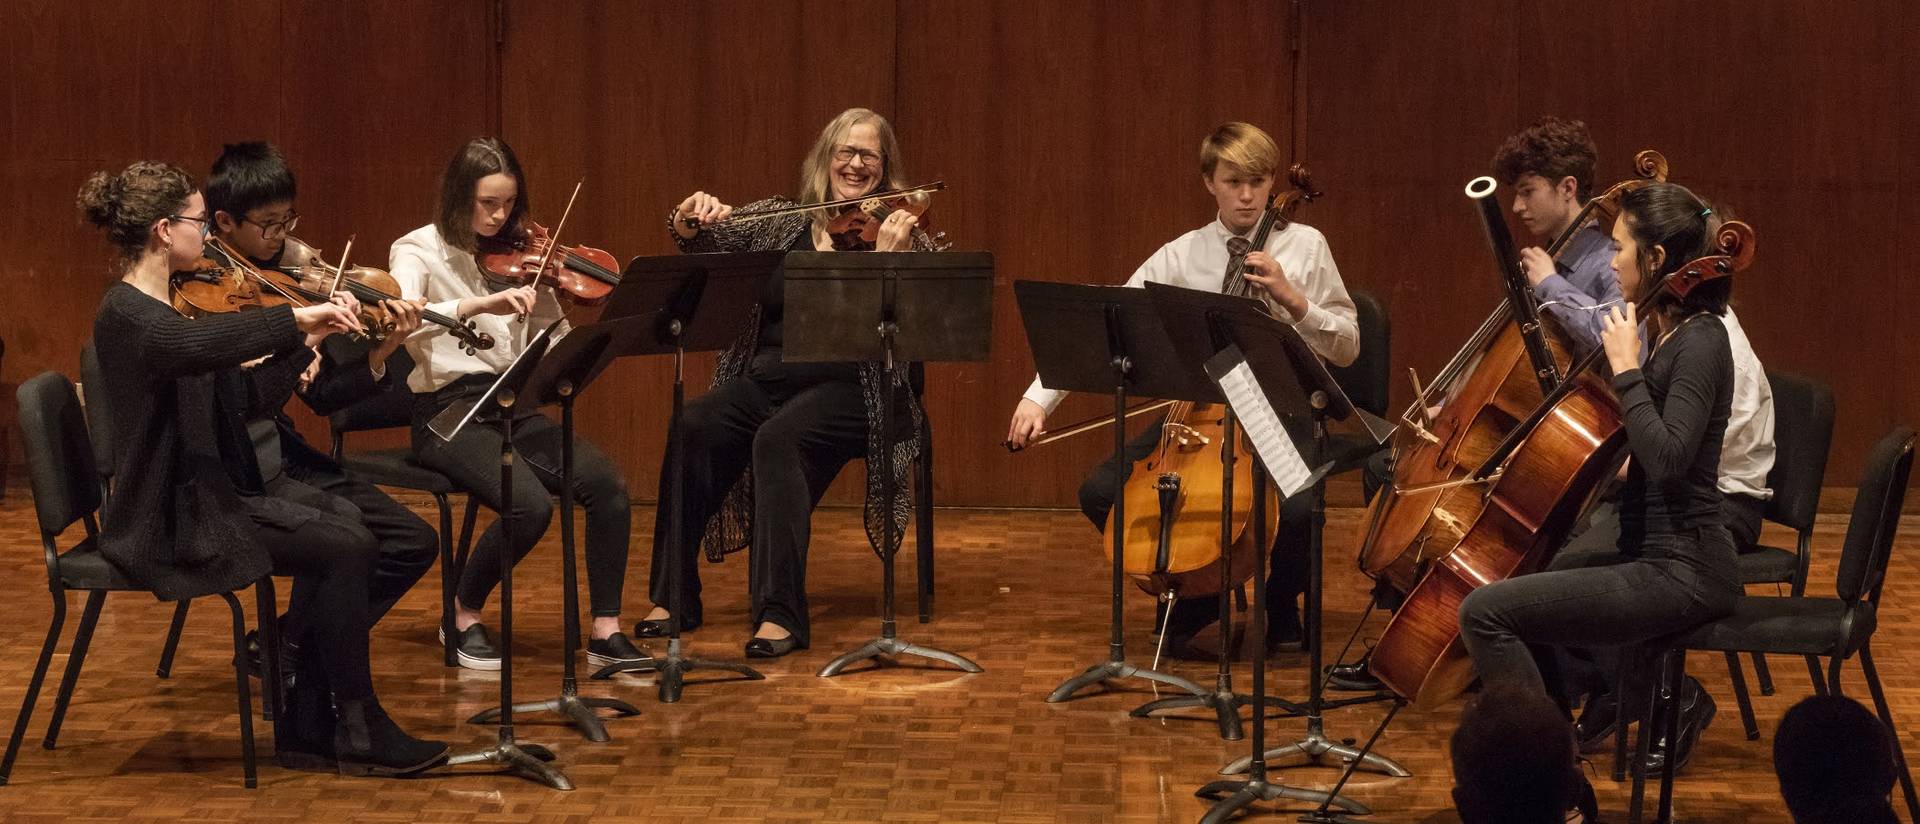 students in a small ensemble playing strings with an instructor